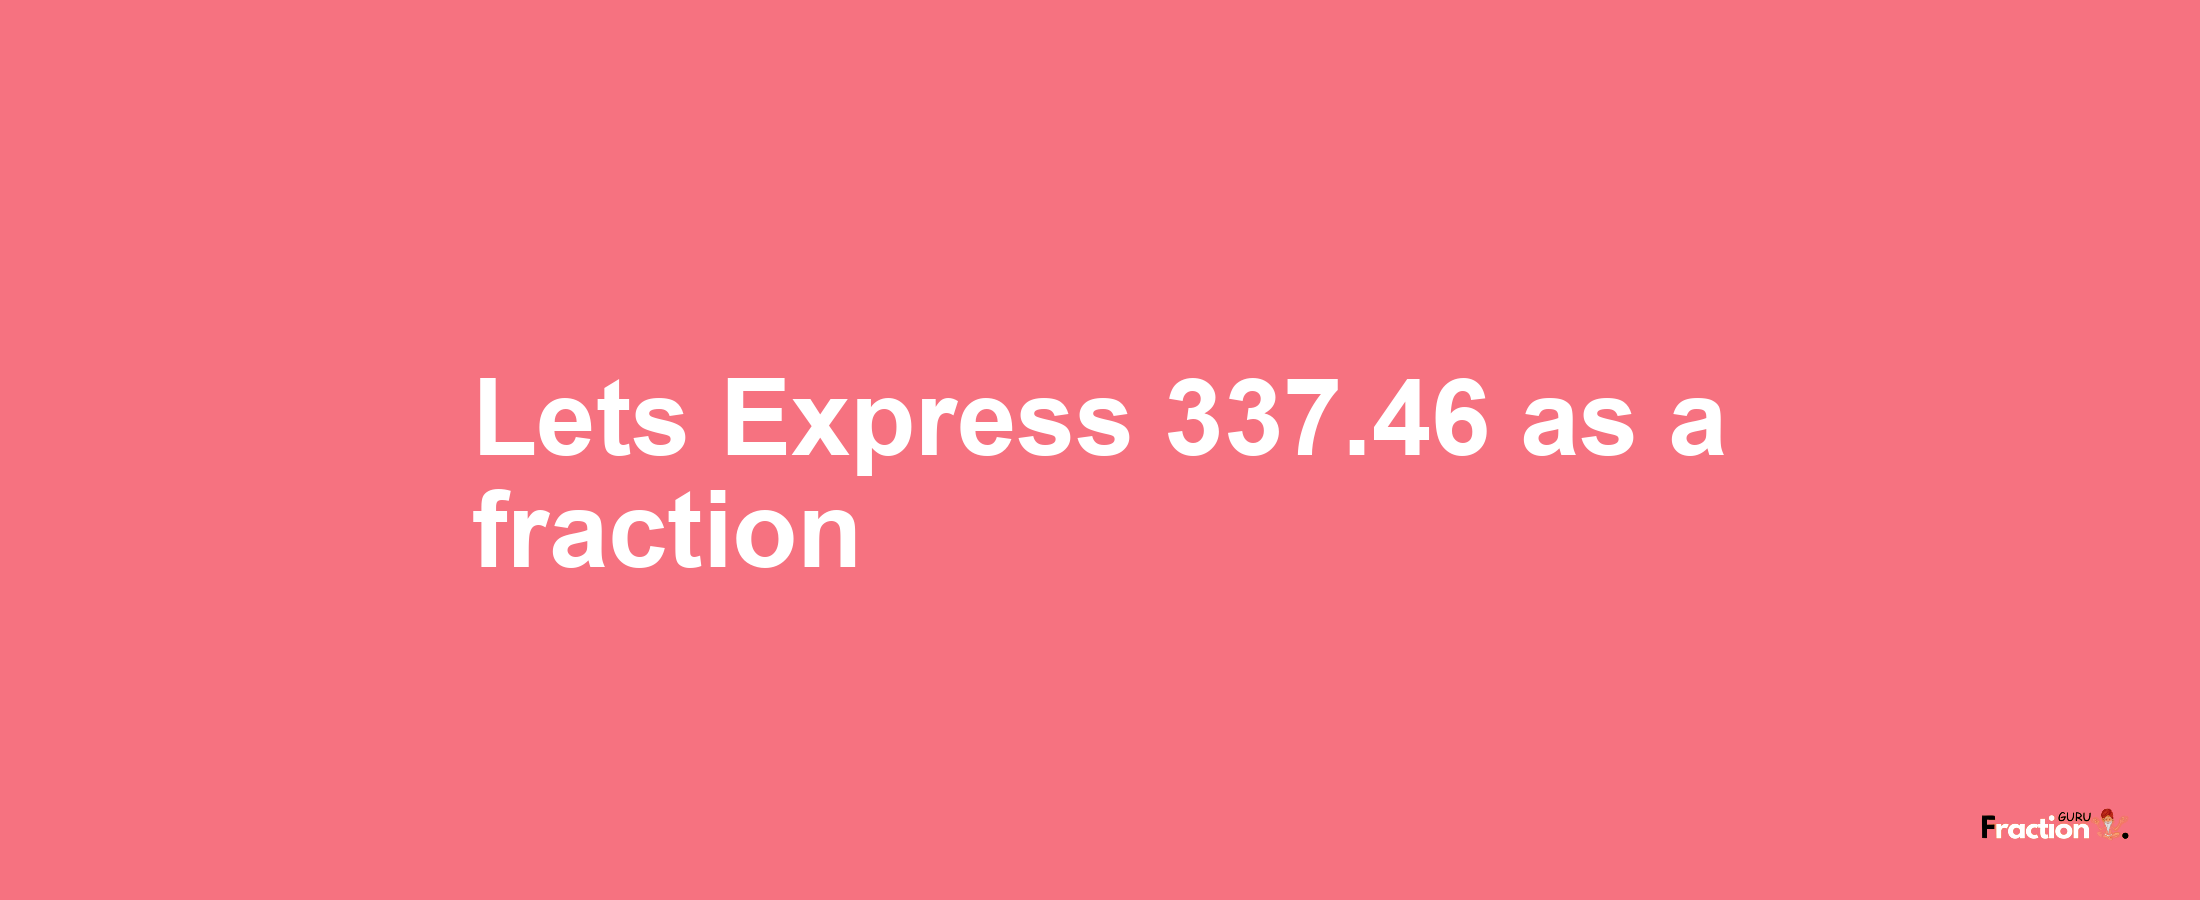 Lets Express 337.46 as afraction